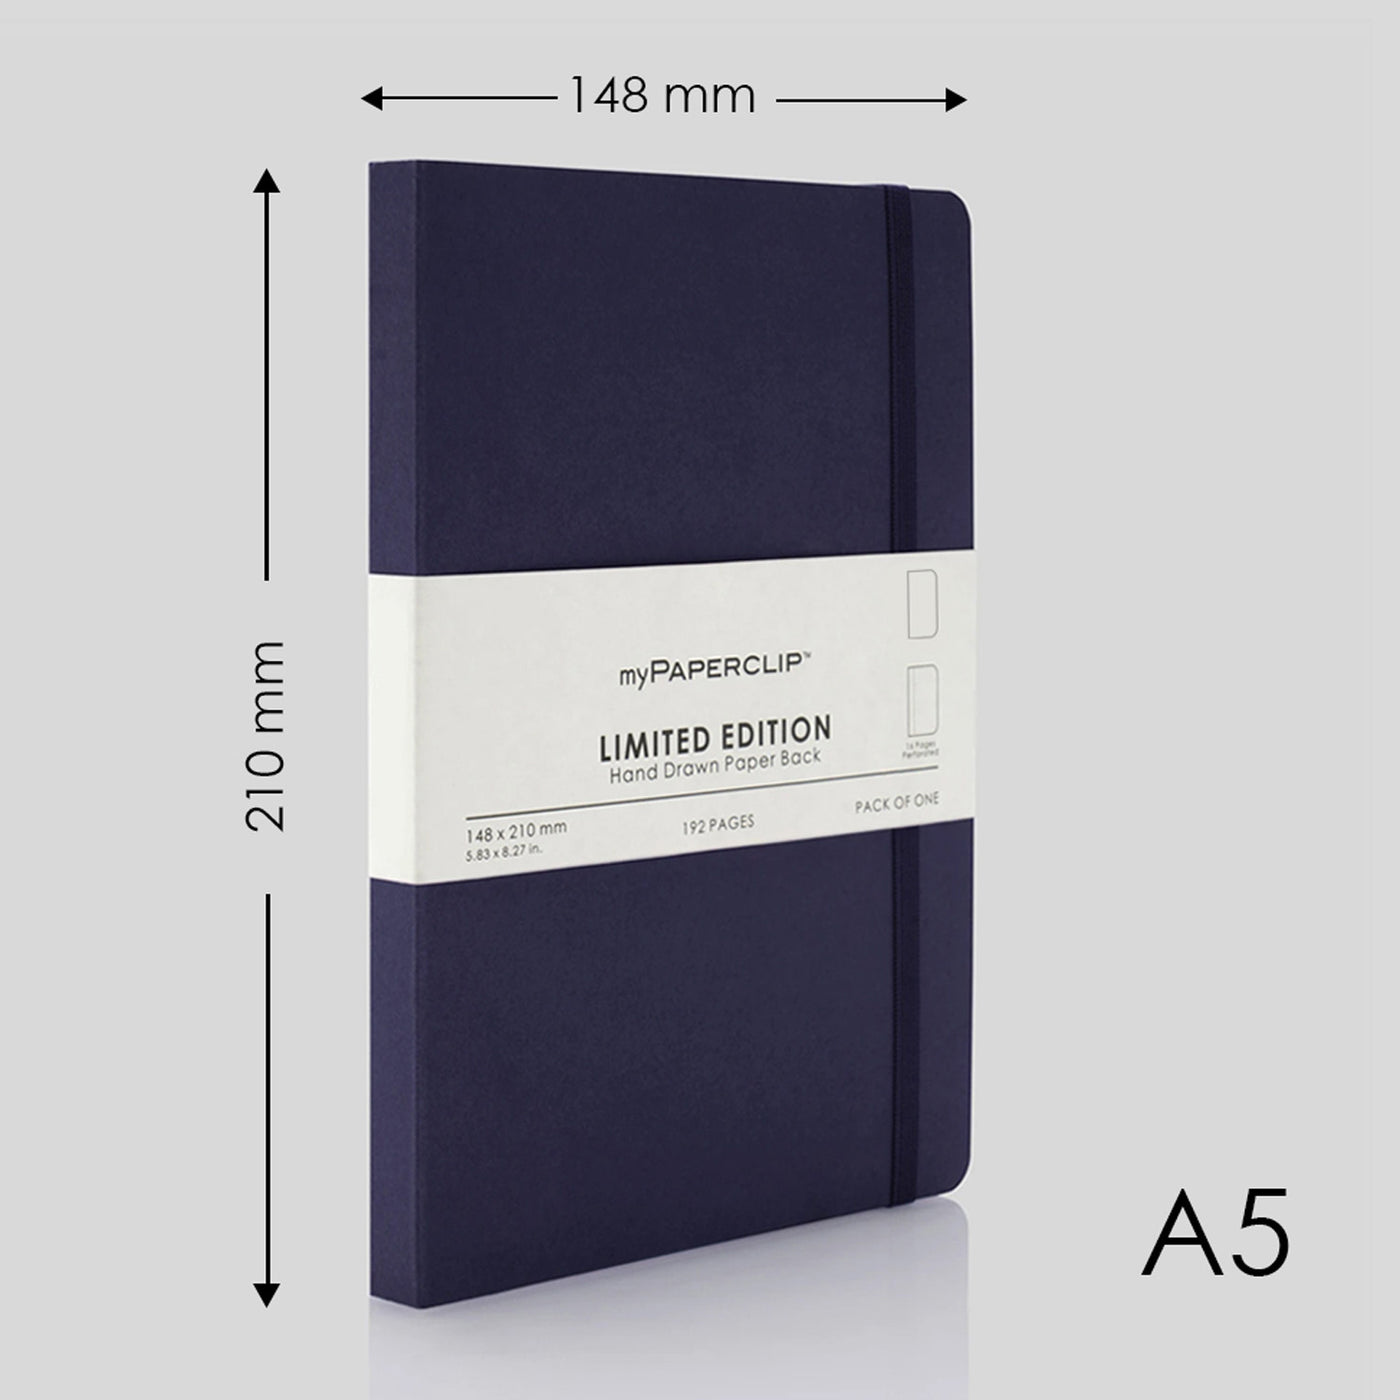 myPAPERCLIP Limited Edition Soft Cover Notebook - Aubergine - A5 - Plain 2